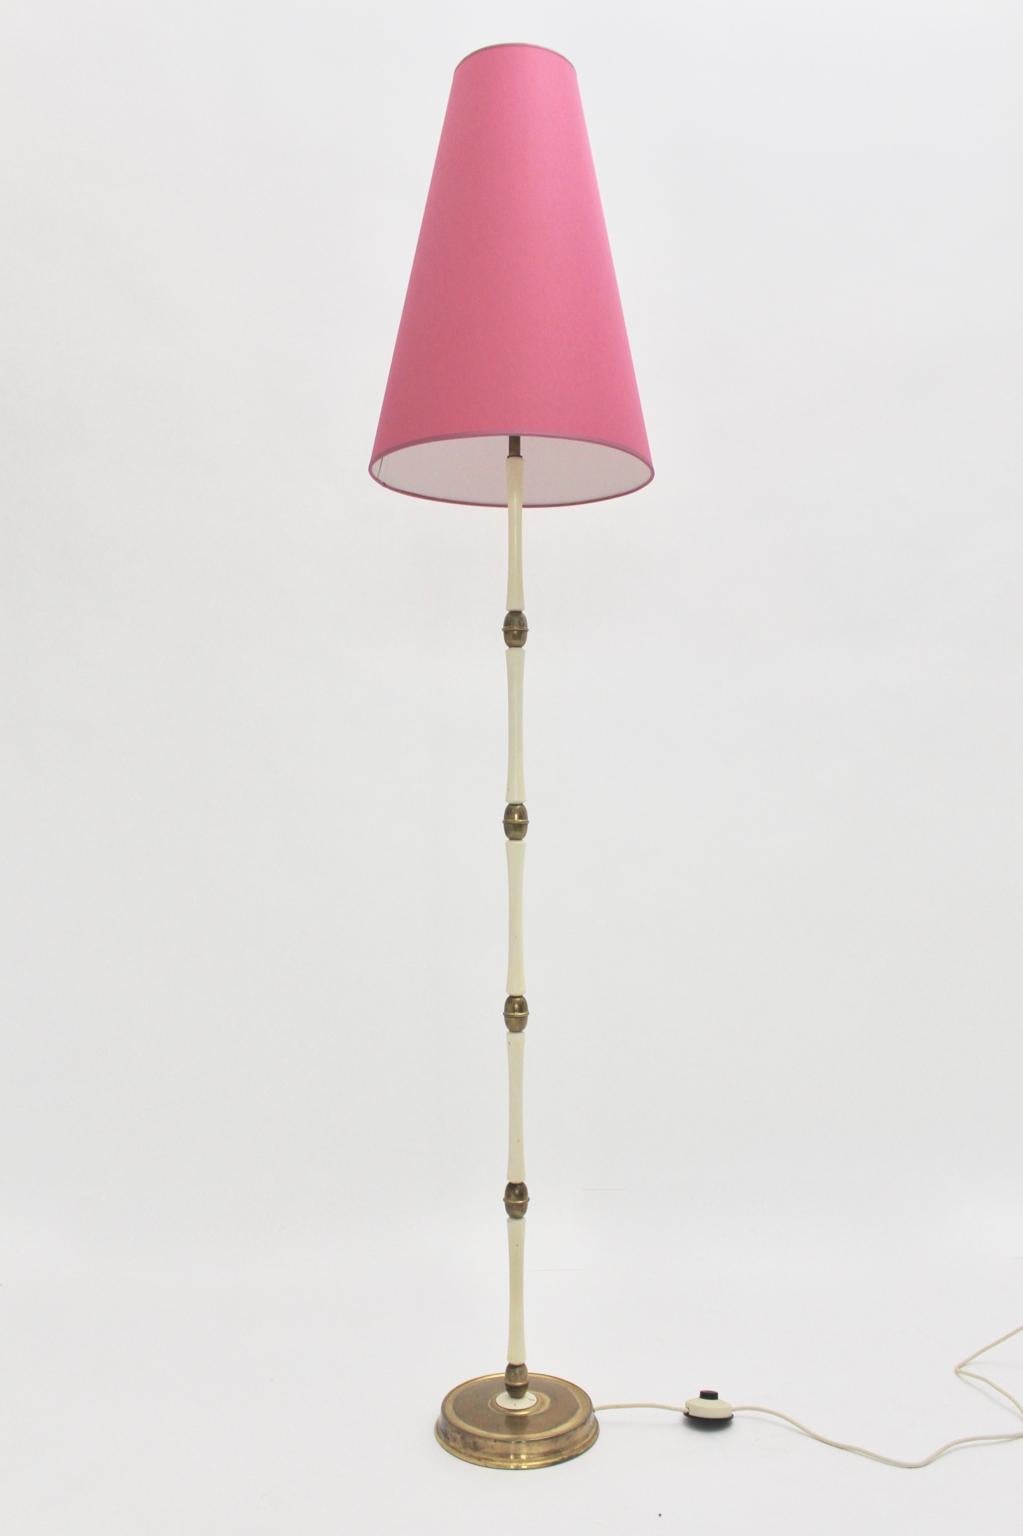 Mid Century Modern original amazing Italian brass and white vintage floor lamp from the 1940s consists of brass, metal and white lacquered beechwood.
Furthermore it presents a renewed lamp shade covered with strawberry pink textile fabric.
The shape